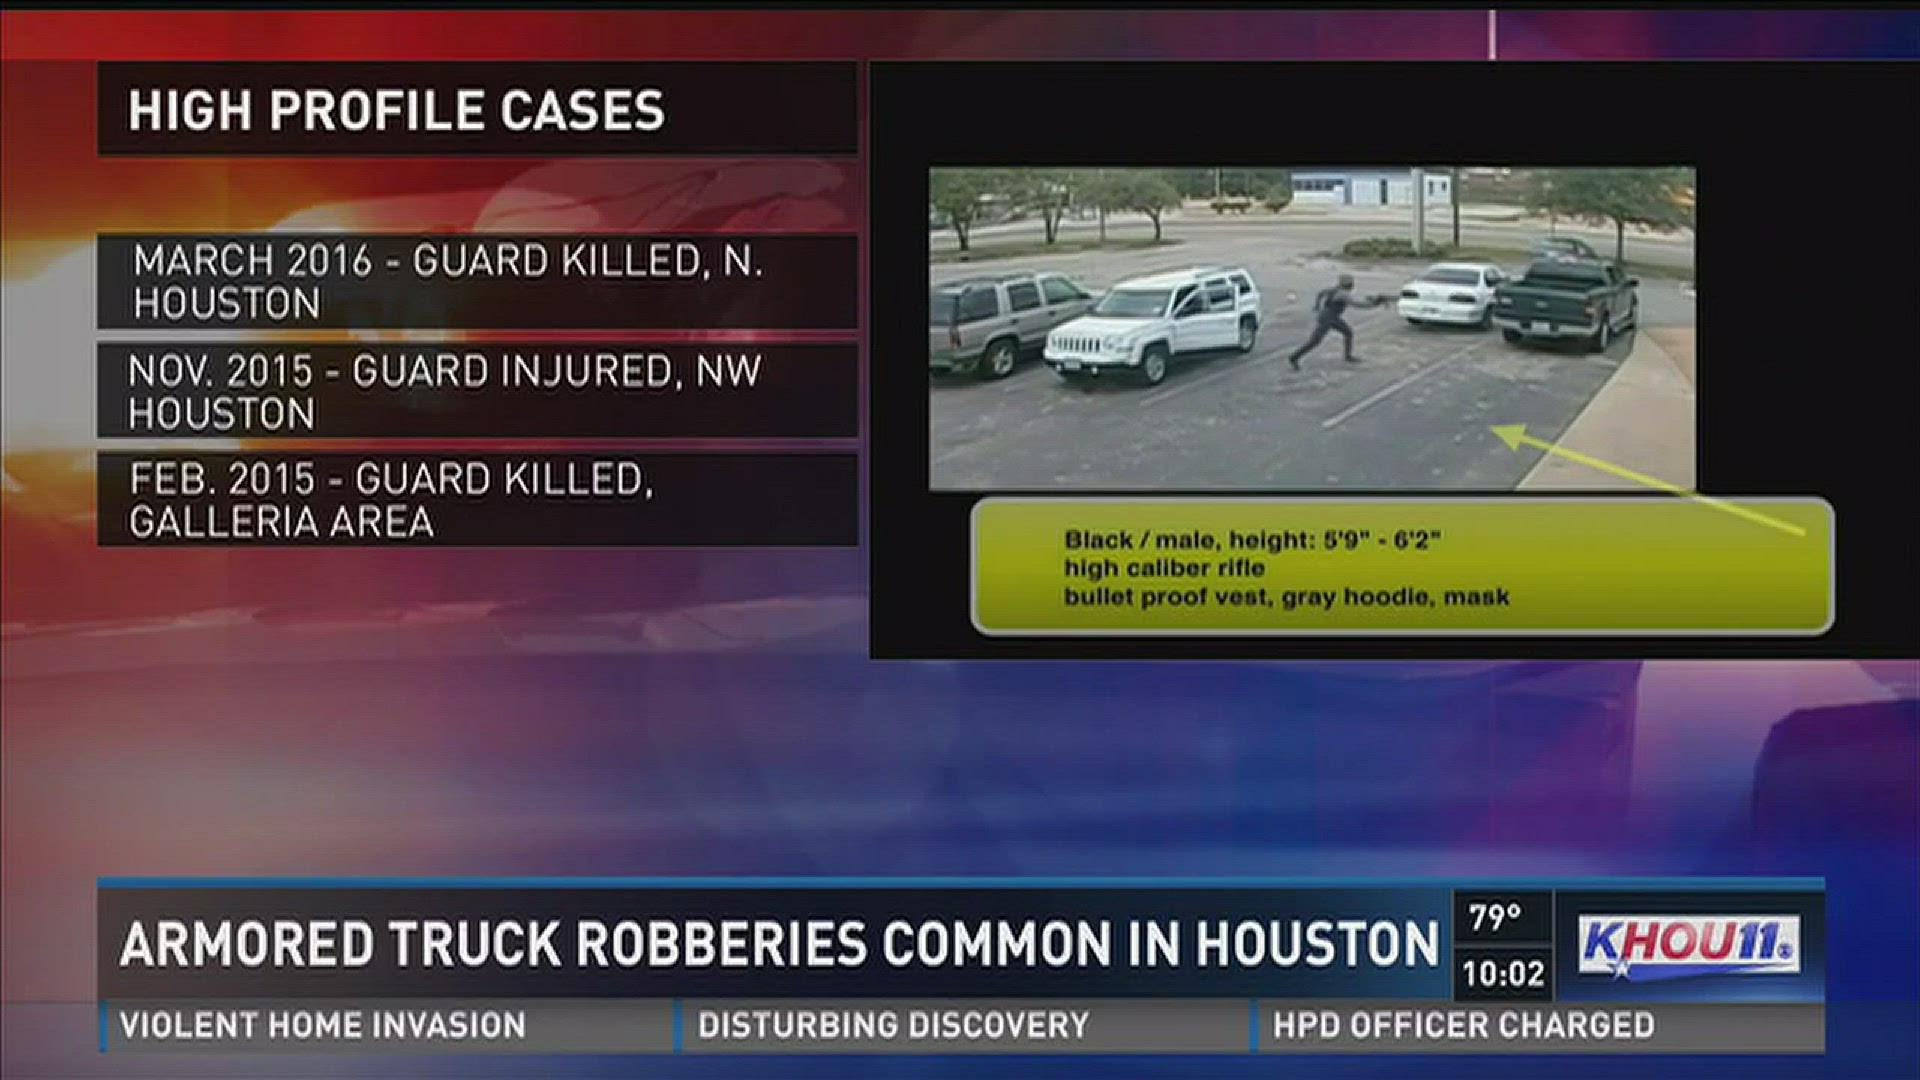 The Houston area ranks as one of the worst in the country for armored truck robberies.